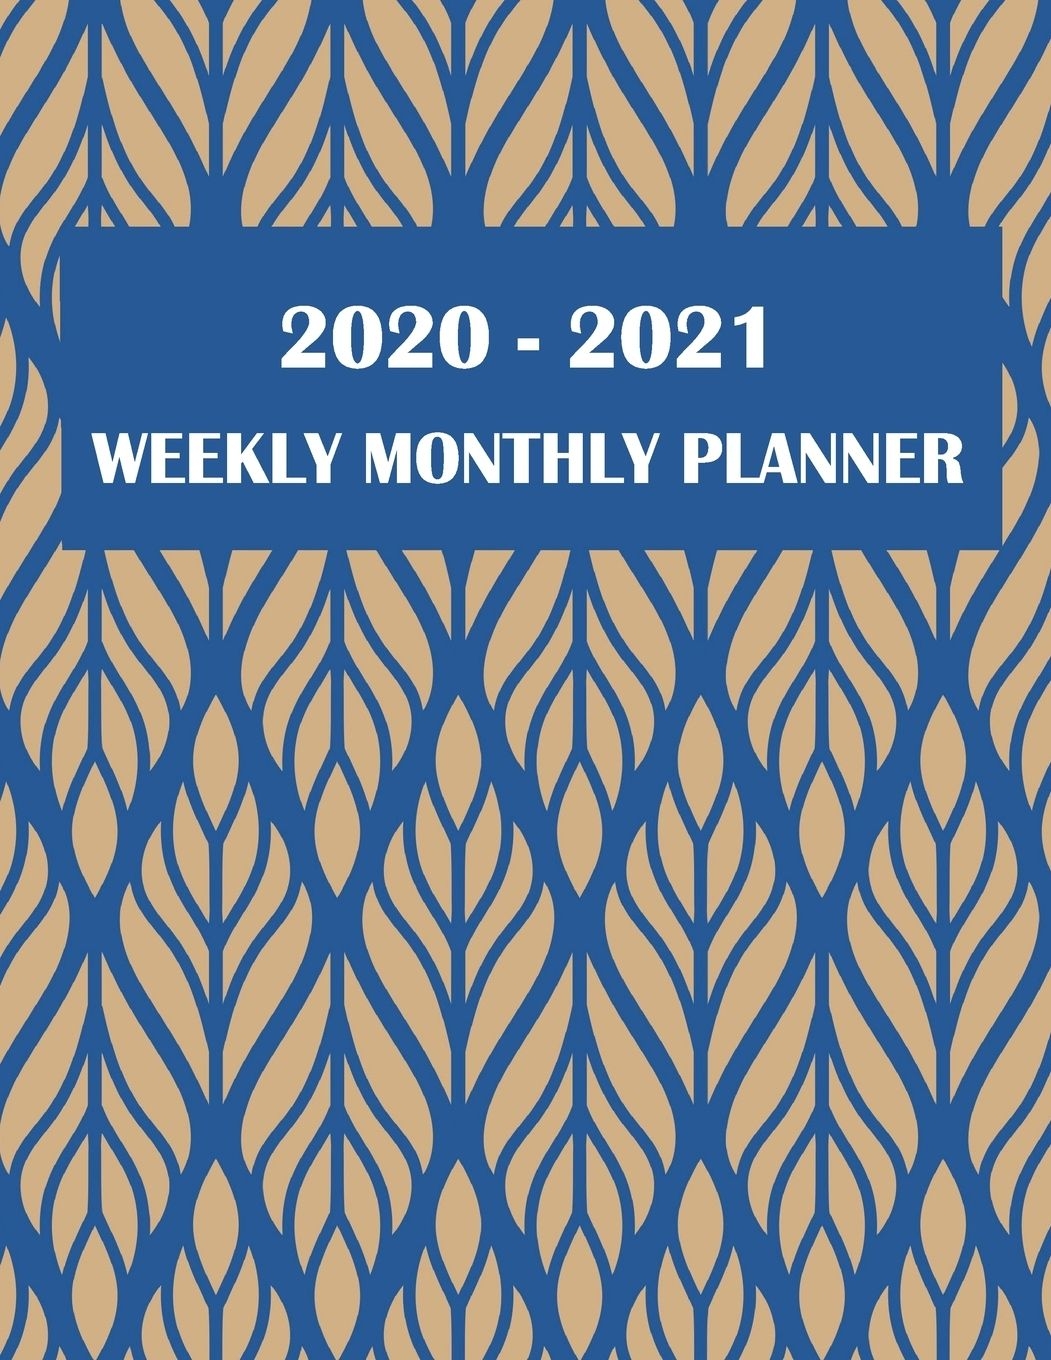 2020 2021 weekly monthly planner : two year academic 2020 2021 calendar book, weekly/monthly/yearly calendar journal, large 8 5 x 11 daily journal